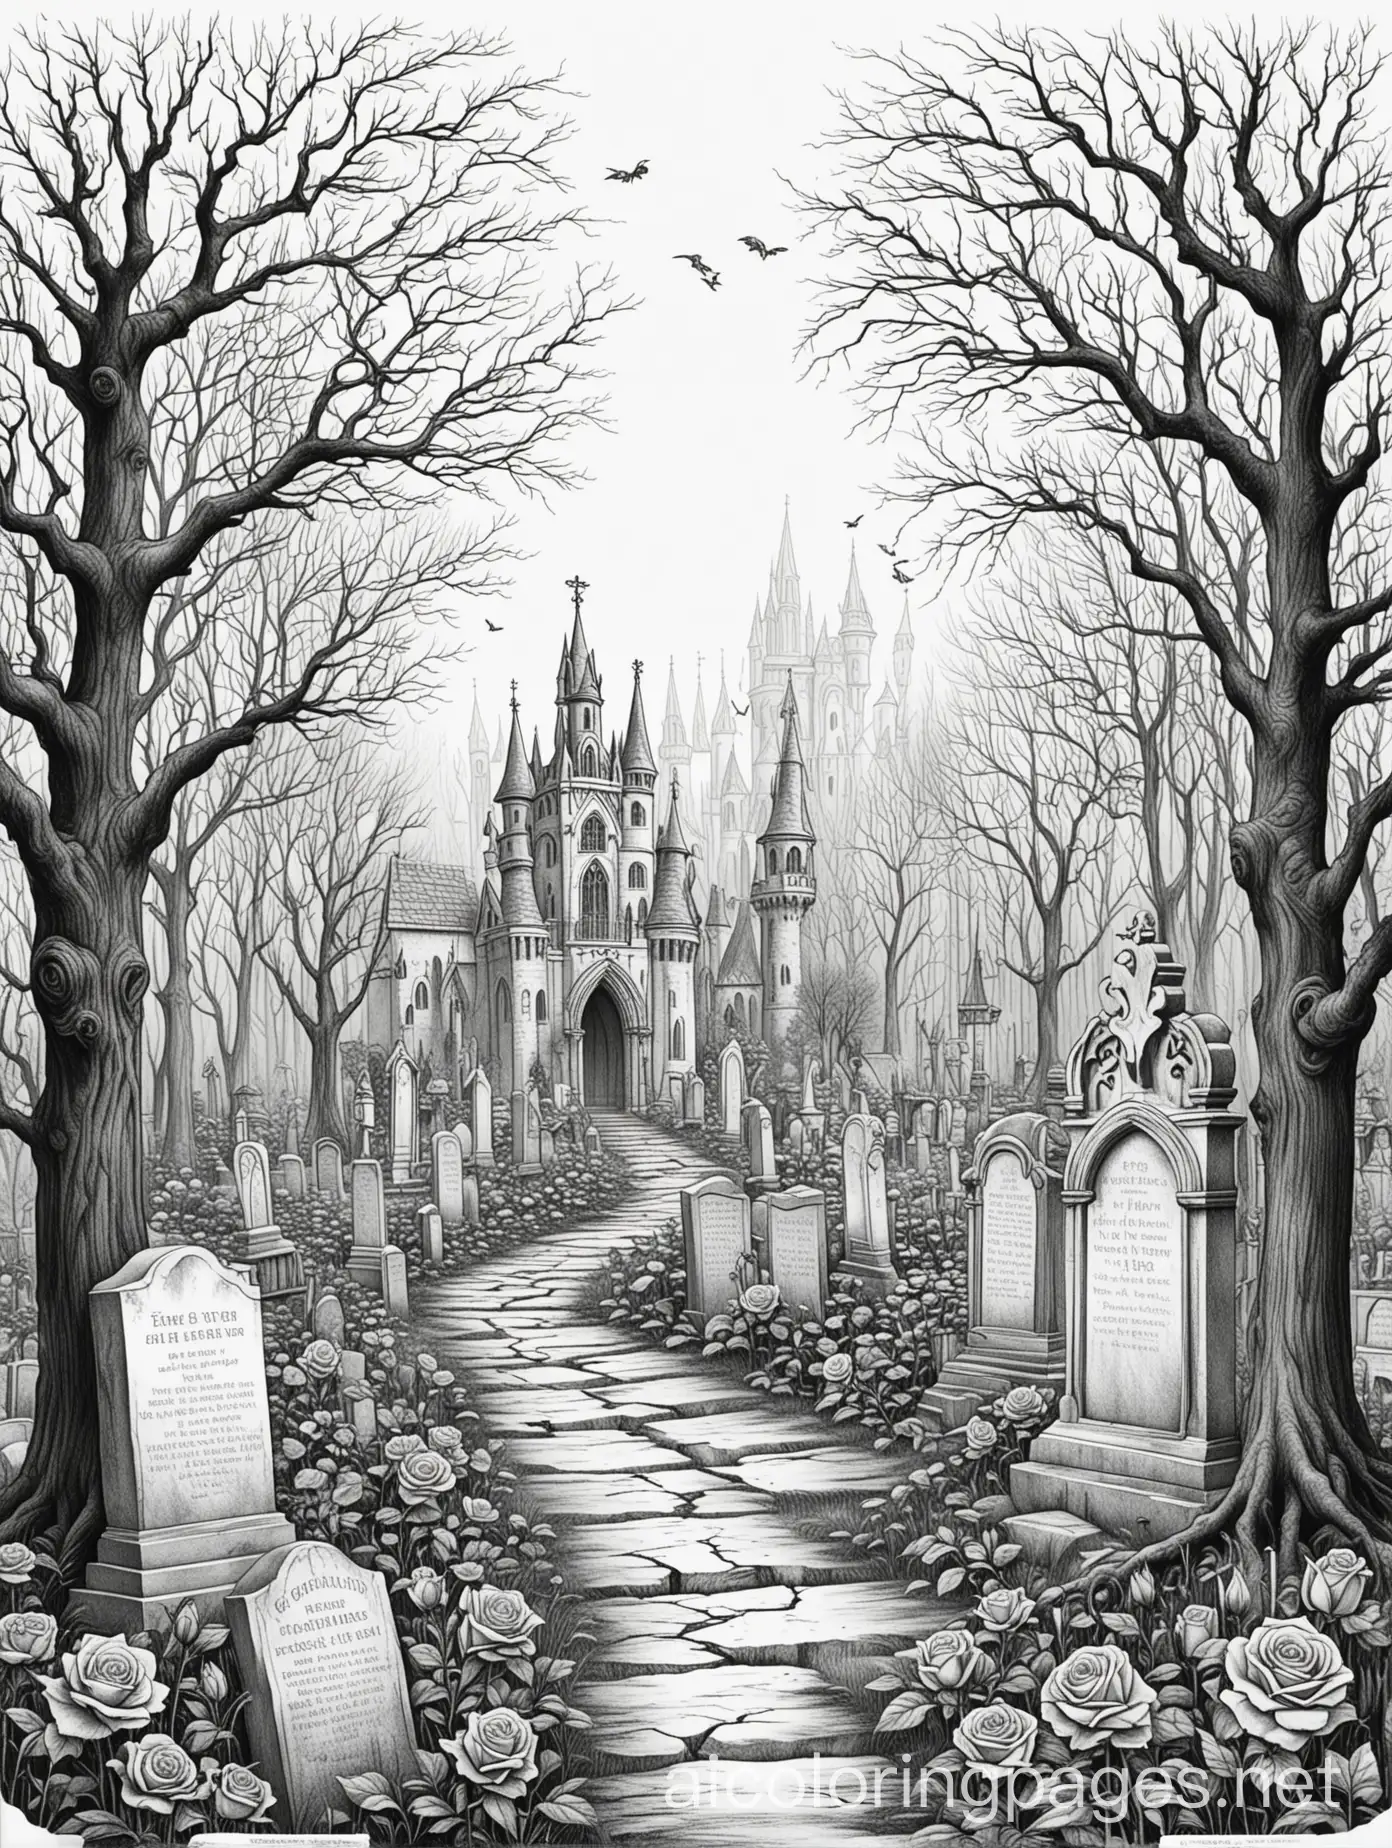 graveyard gothic roses gravestones creepy trees castle, Coloring Page, black and white, line art, white background, Simplicity, Ample White Space. The background of the coloring page is plain white to make it easy for young children to color within the lines. The outlines of all the subjects are easy to distinguish, making it simple for kids to color without too much difficulty